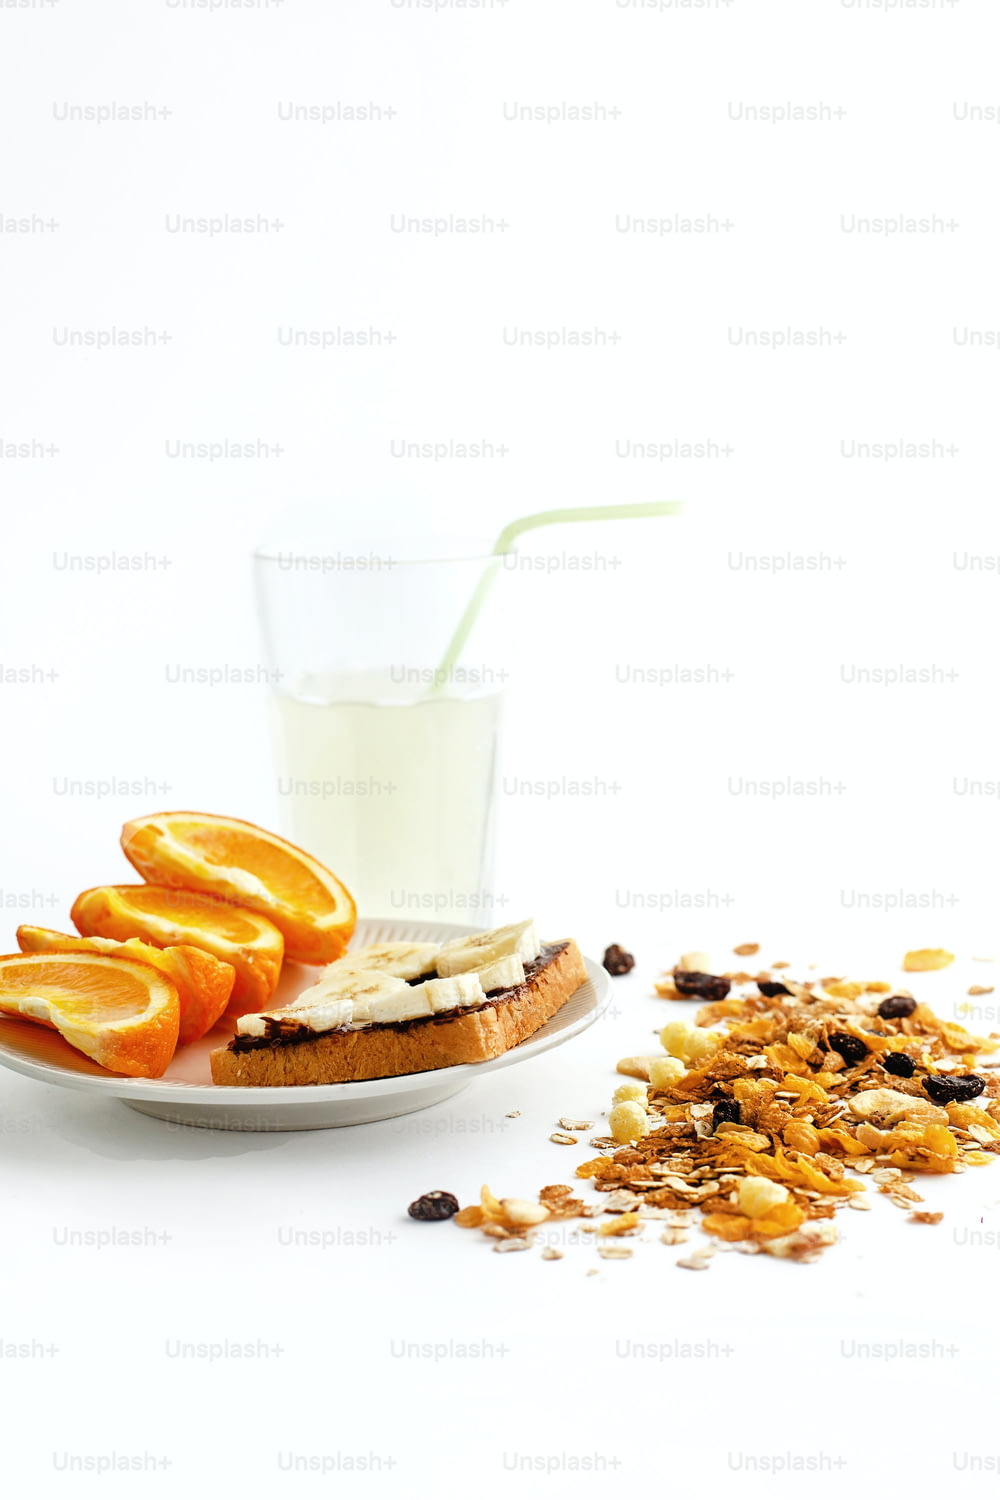 delicious juicy oranges and banana on bread with chocolate and fresh drink and granola  on white background, health eating concept